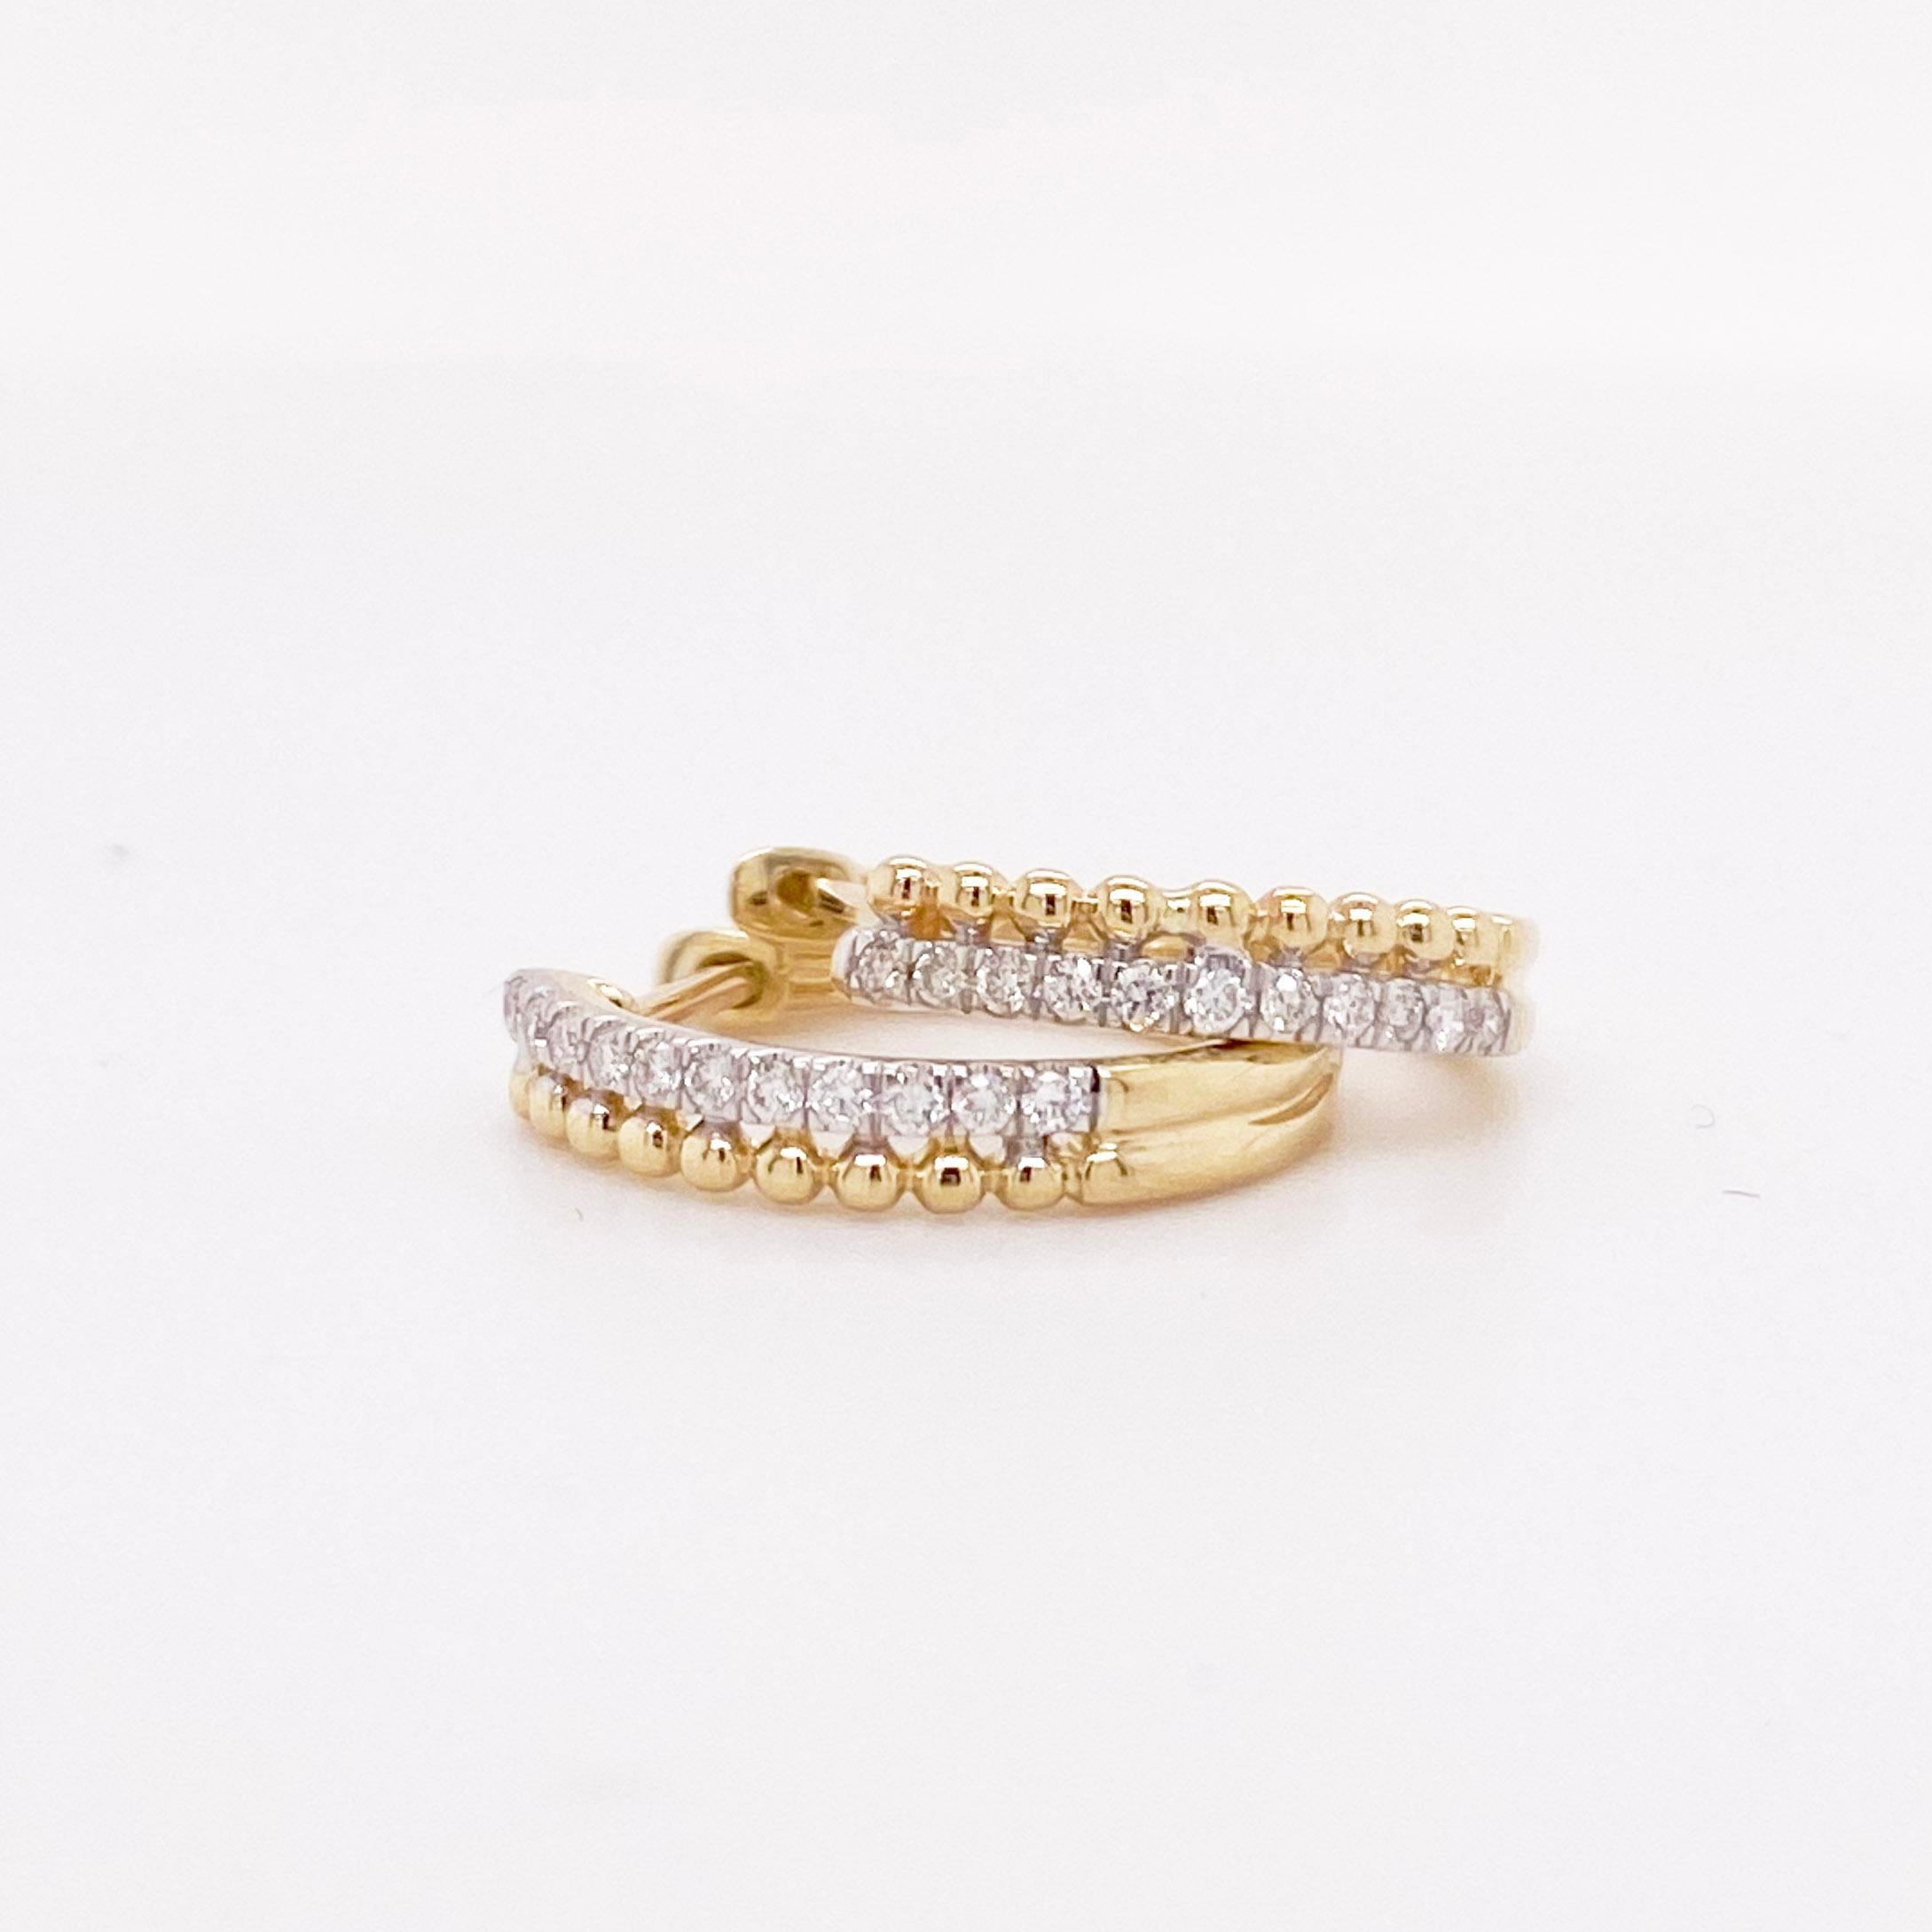 The stunning diamond huggie earrings have a two row design with one gold beaded row next to a pave diamond row. The design is dainty and modern! These earrings look amazing on their own and can easily be paired with other earrings for a custom